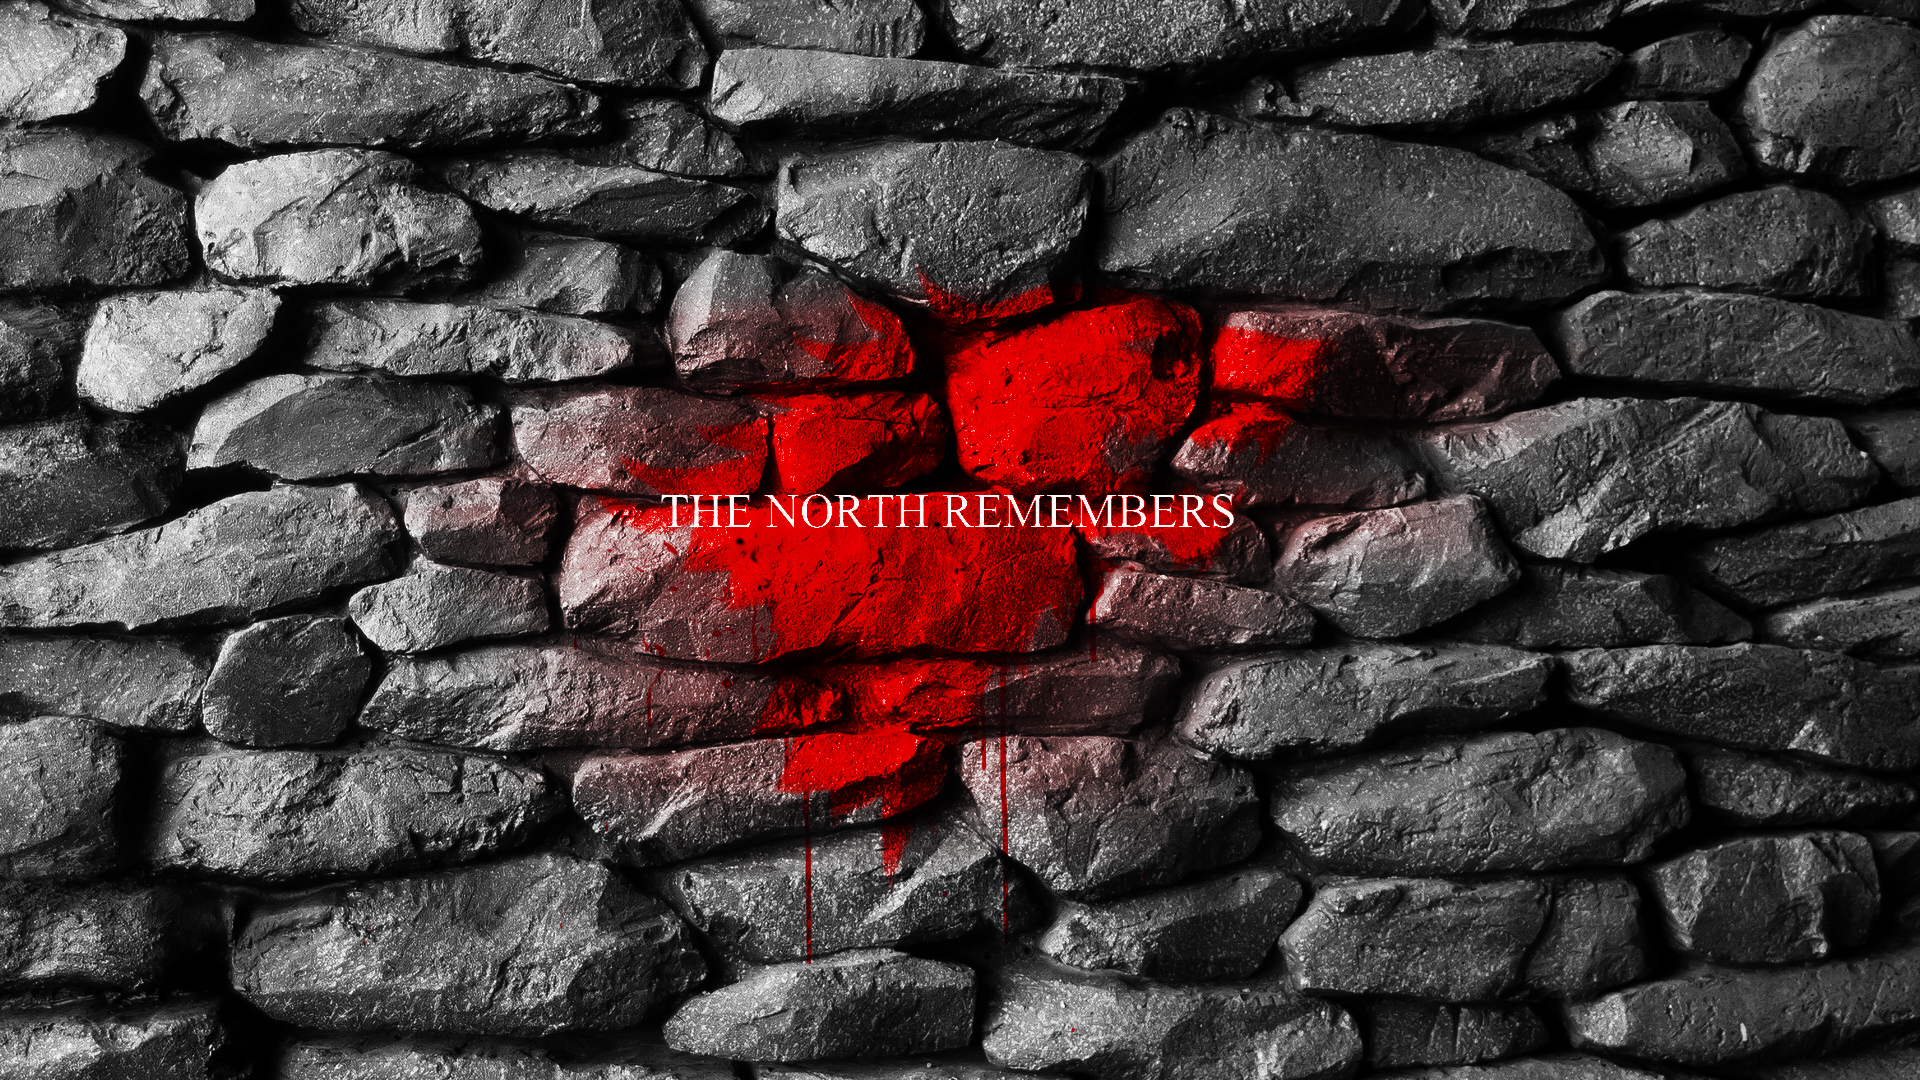 the north remembers wallpaper,brick,wall,red,text,stone wall